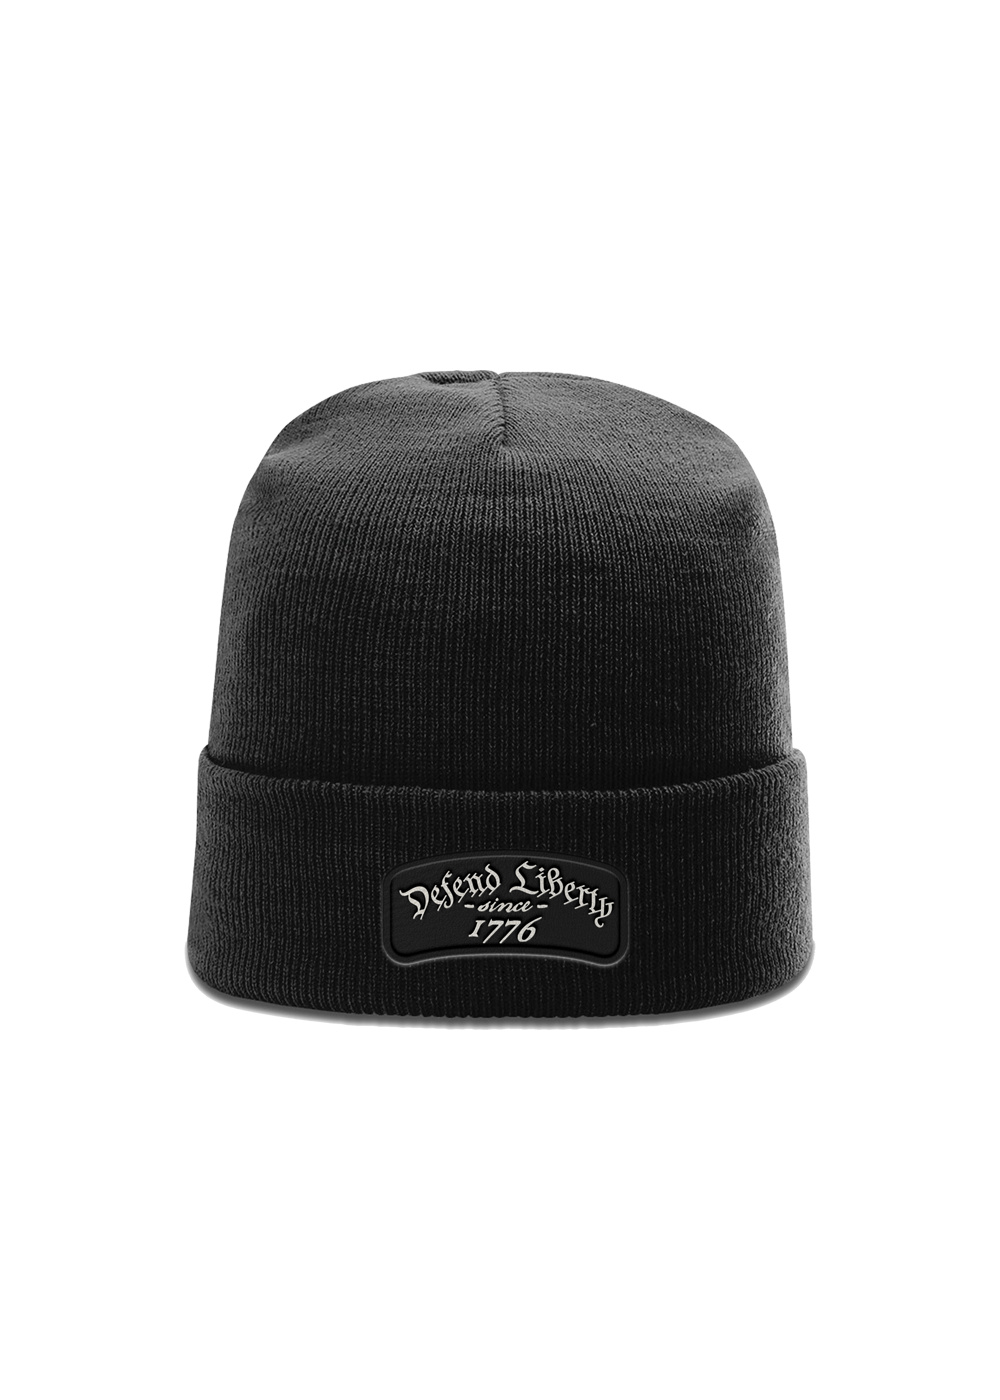 Defend Liberty Leather Patch Beanie